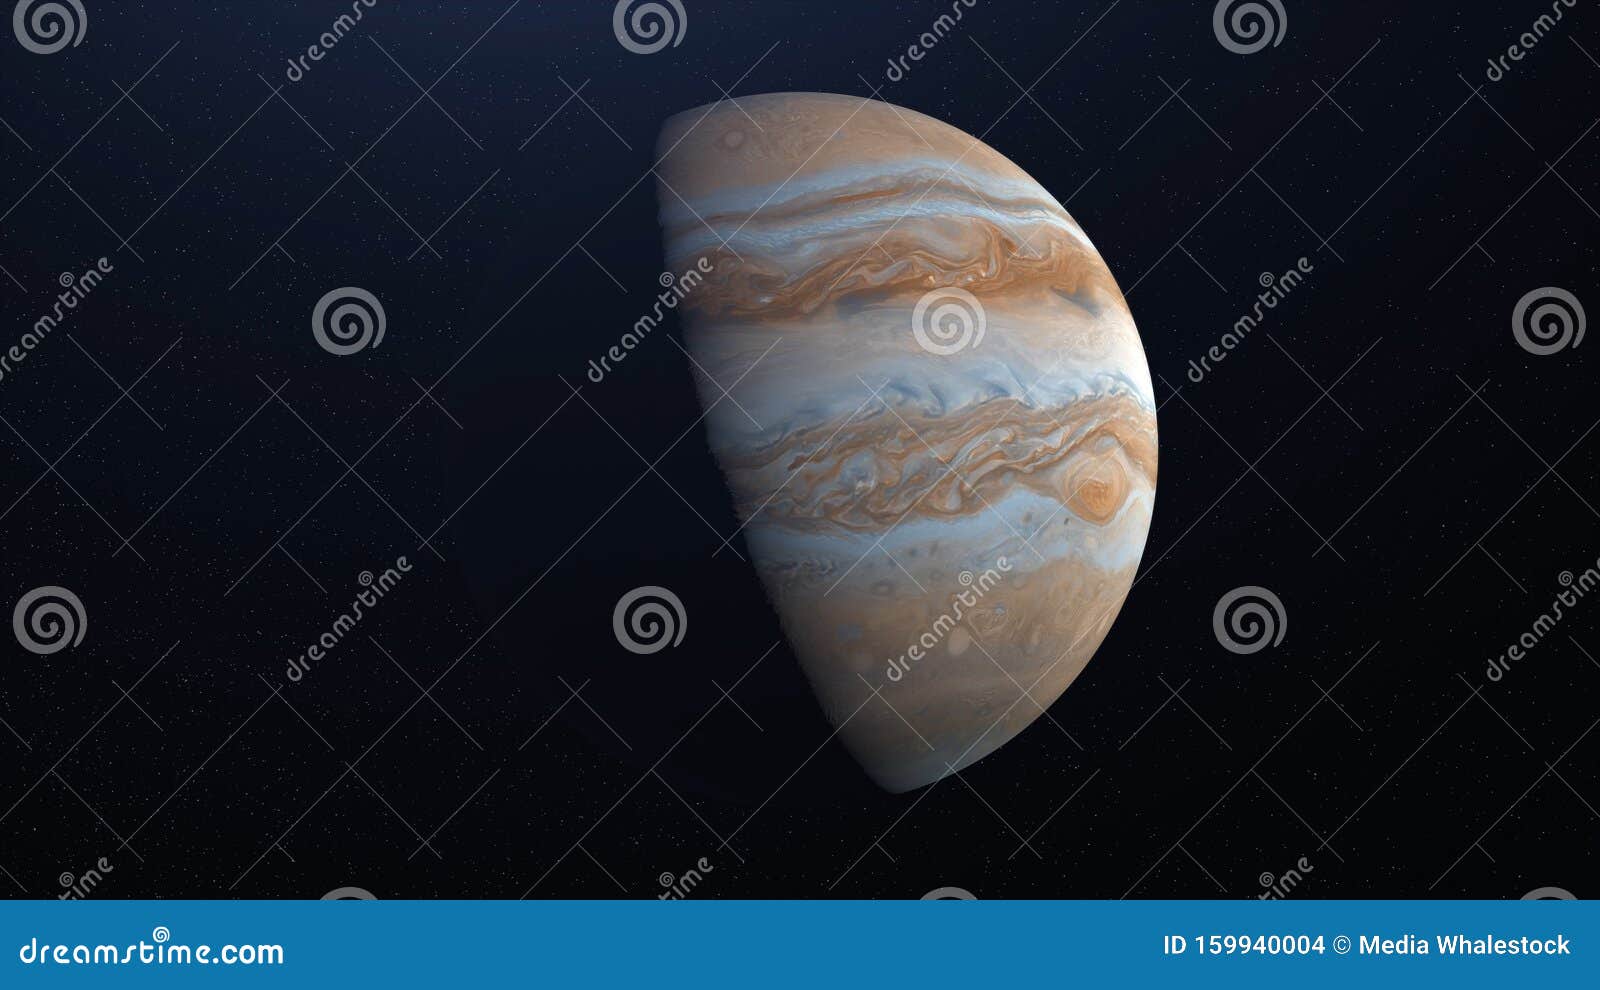 abstract planet jupiter rotating in outer space. animation. sunrise and sunfall on the colorful white and brown surface